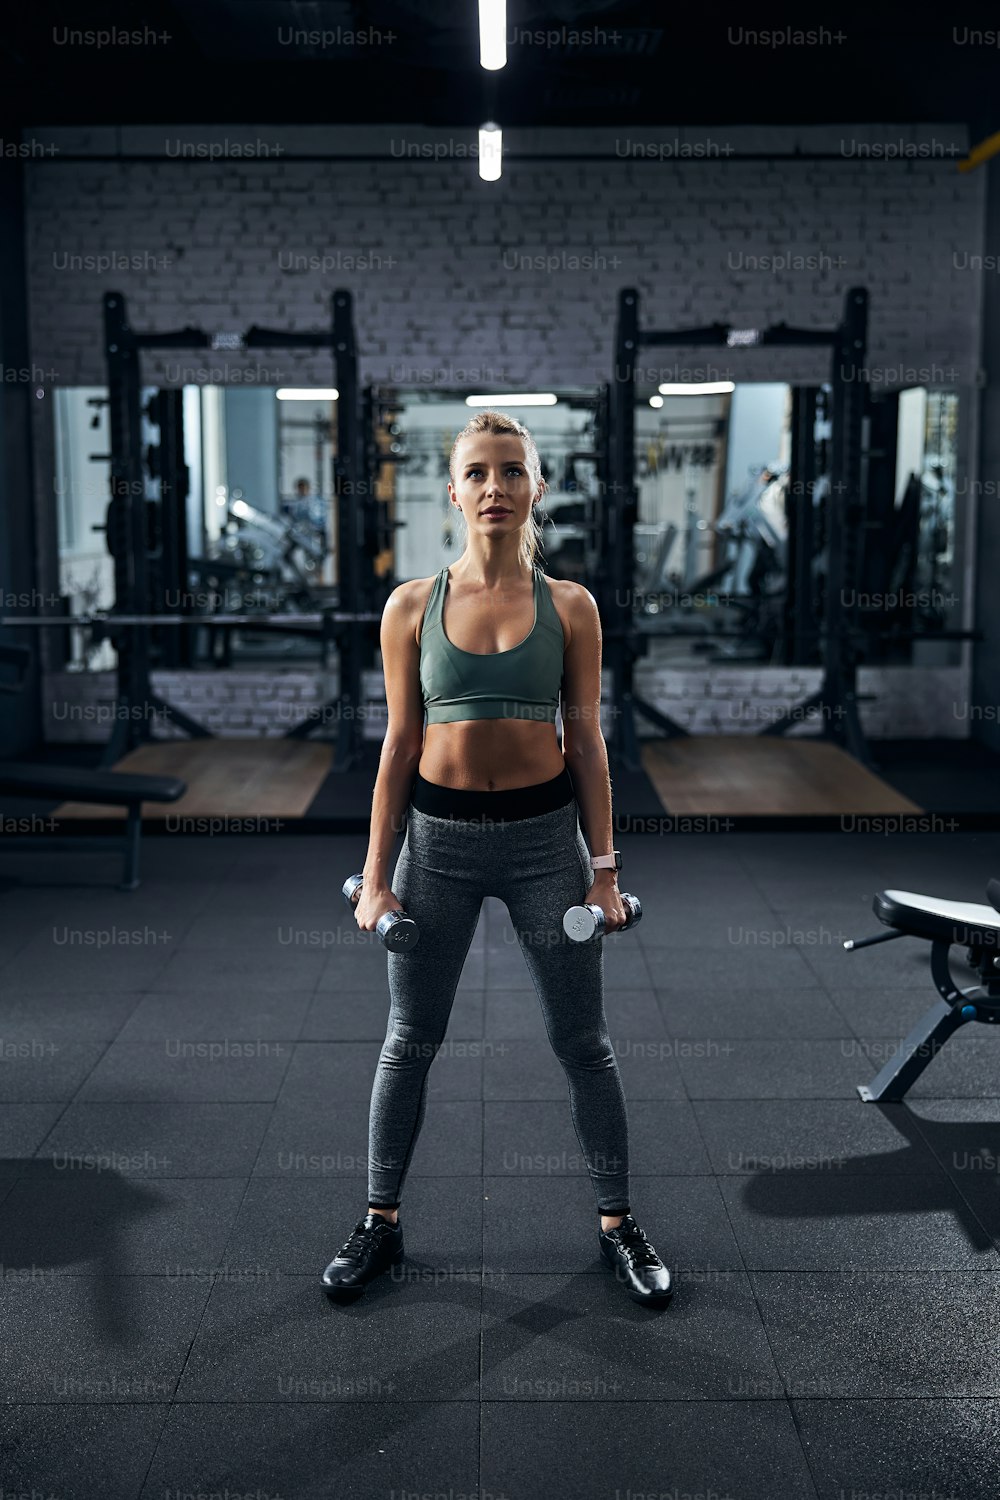 Sportsperson holding a dumbbell in each hand while standing on a black gym carpet